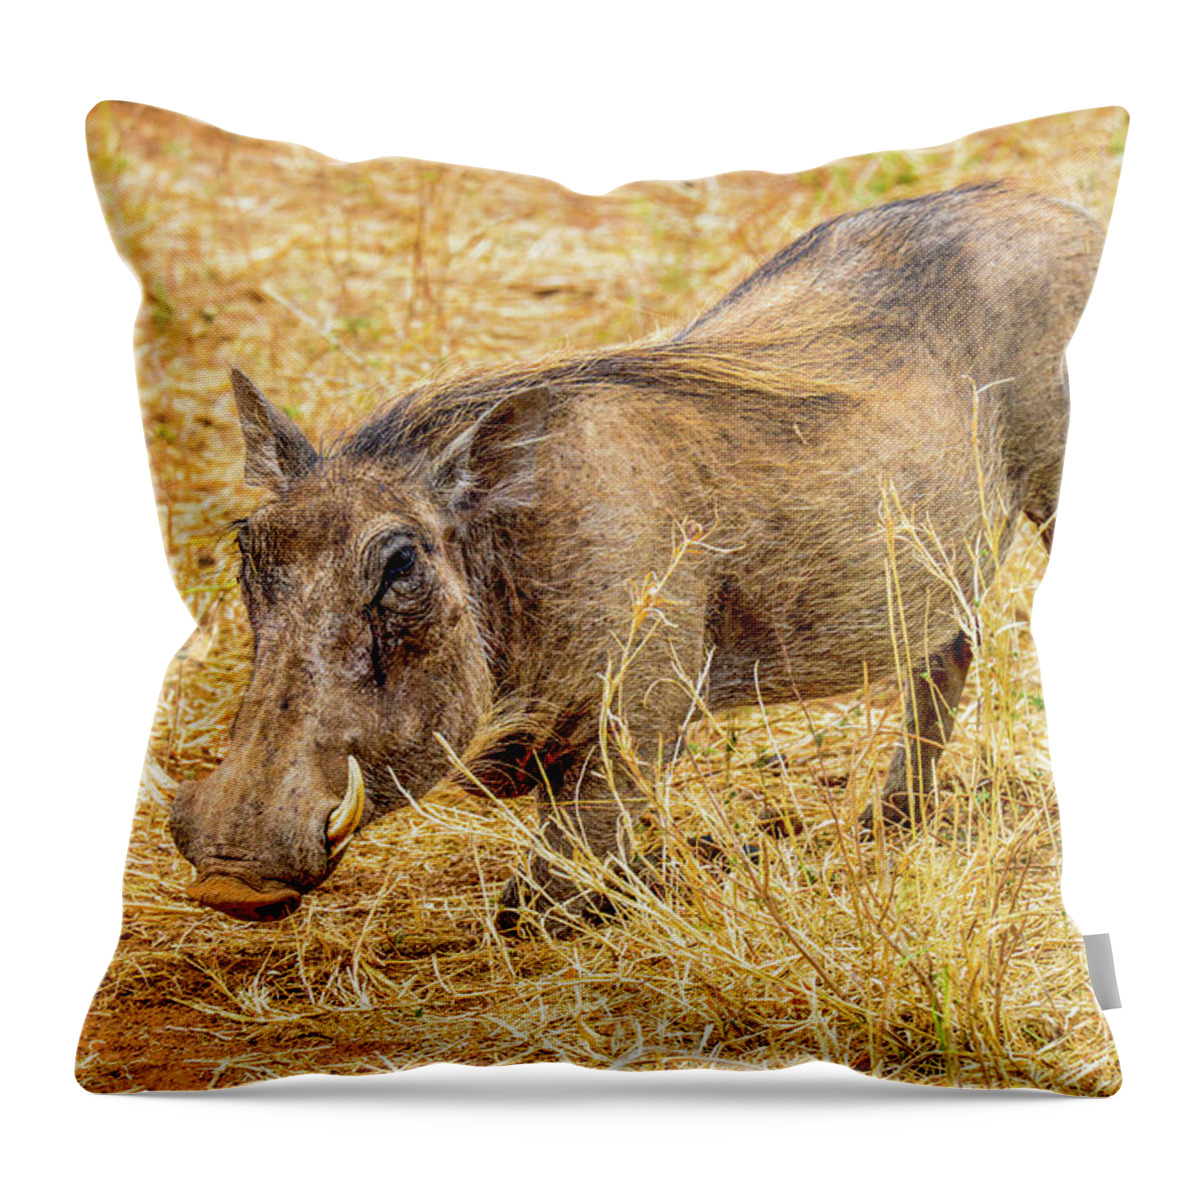 Africa Throw Pillow featuring the photograph Warthog by Marilyn Burton